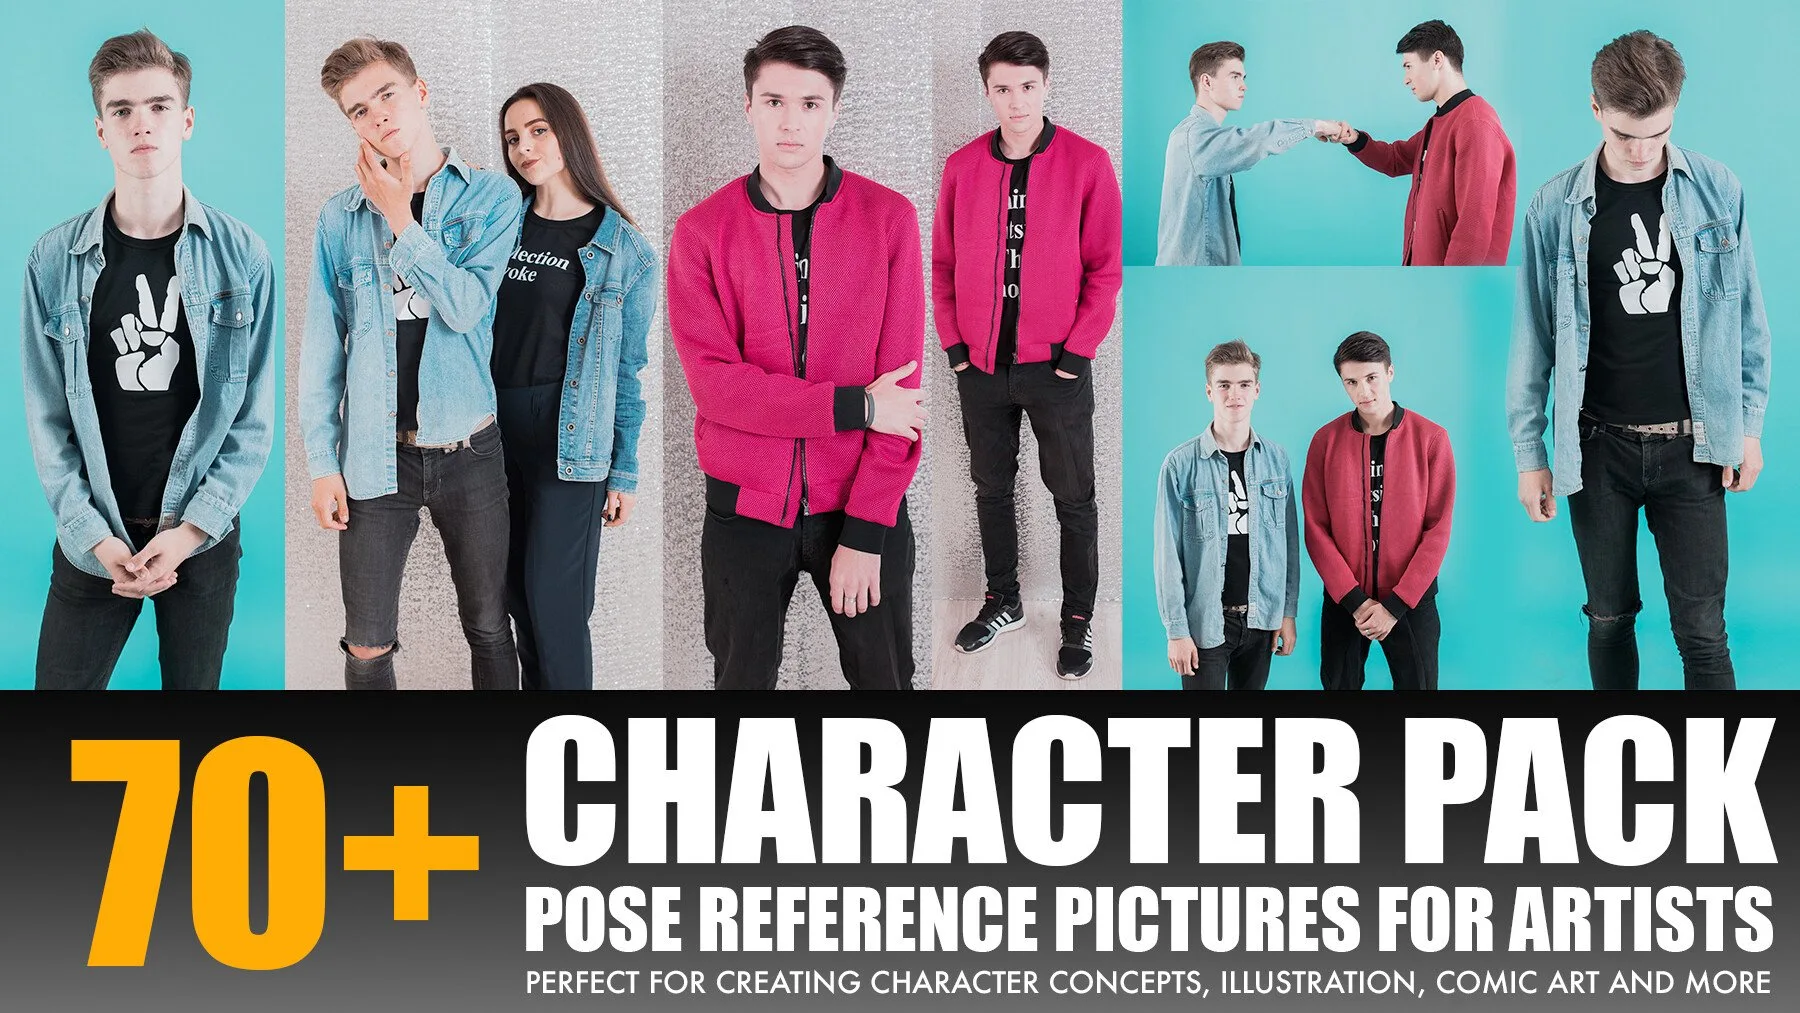 Photo/Textures Reference Pack: 70+ Character Pose Reference Pictures "Young Guy in Studio"